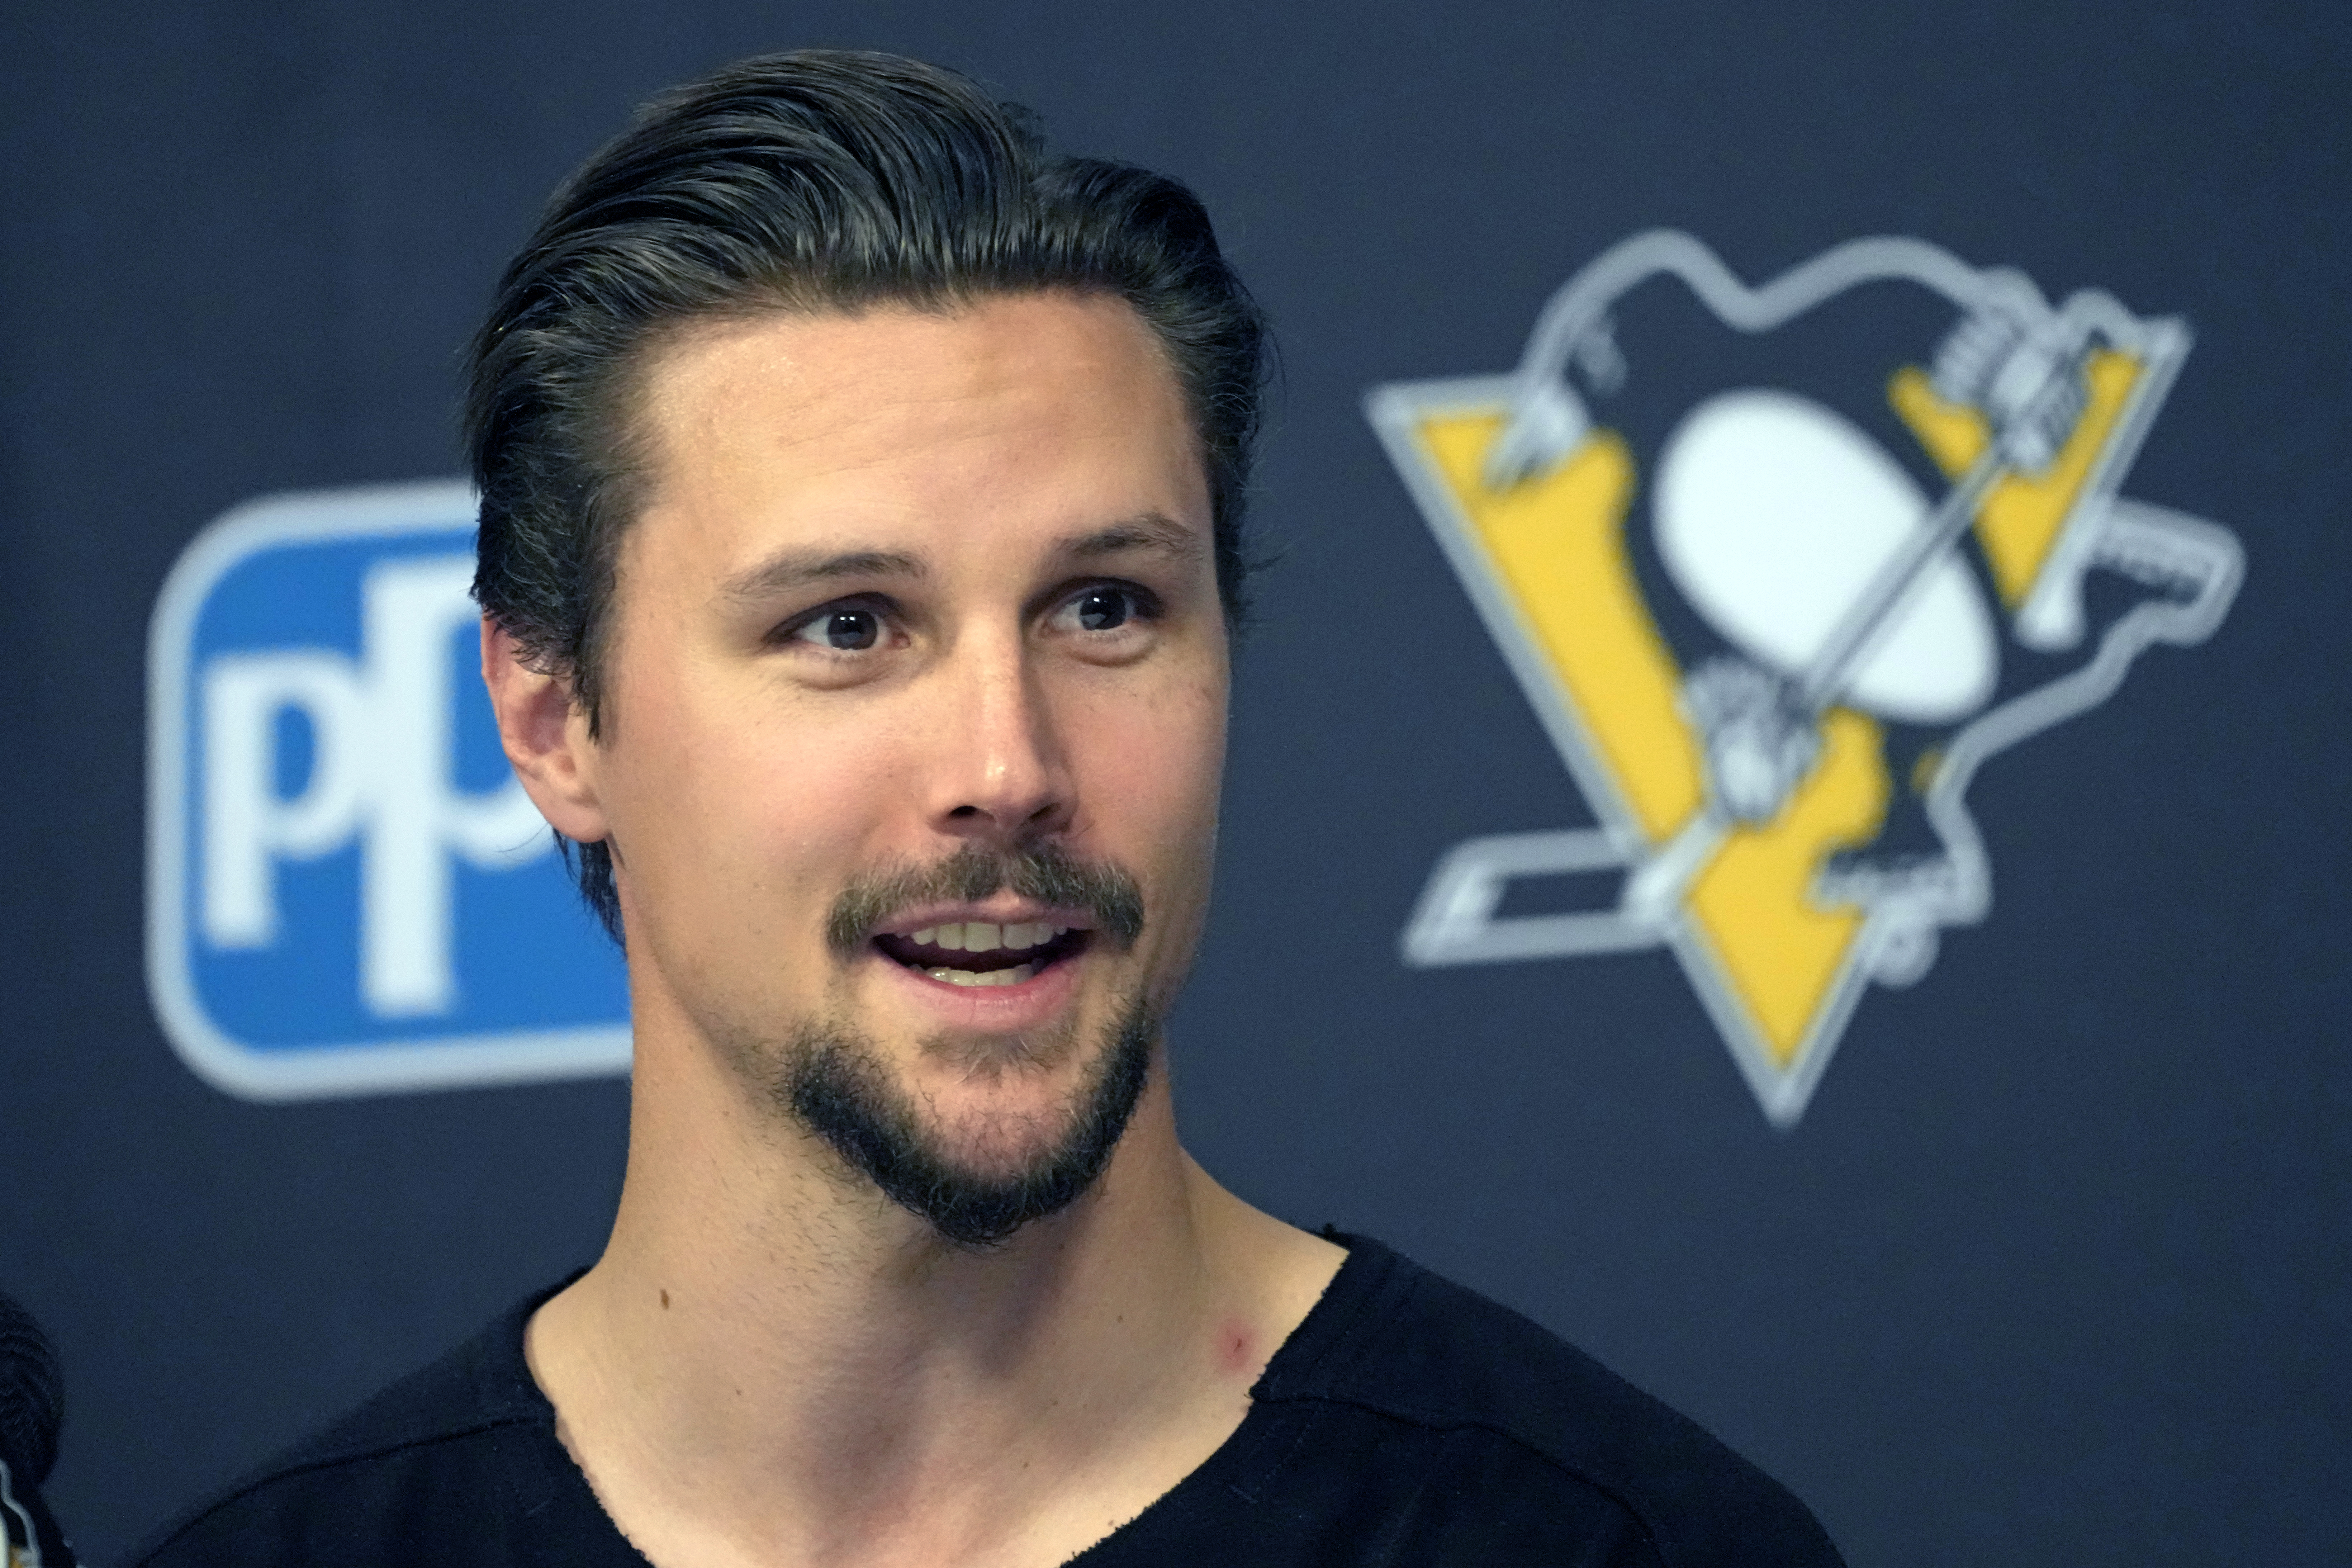 Pittsburgh Penguins hope Karlsson's arrival on the blue line helps